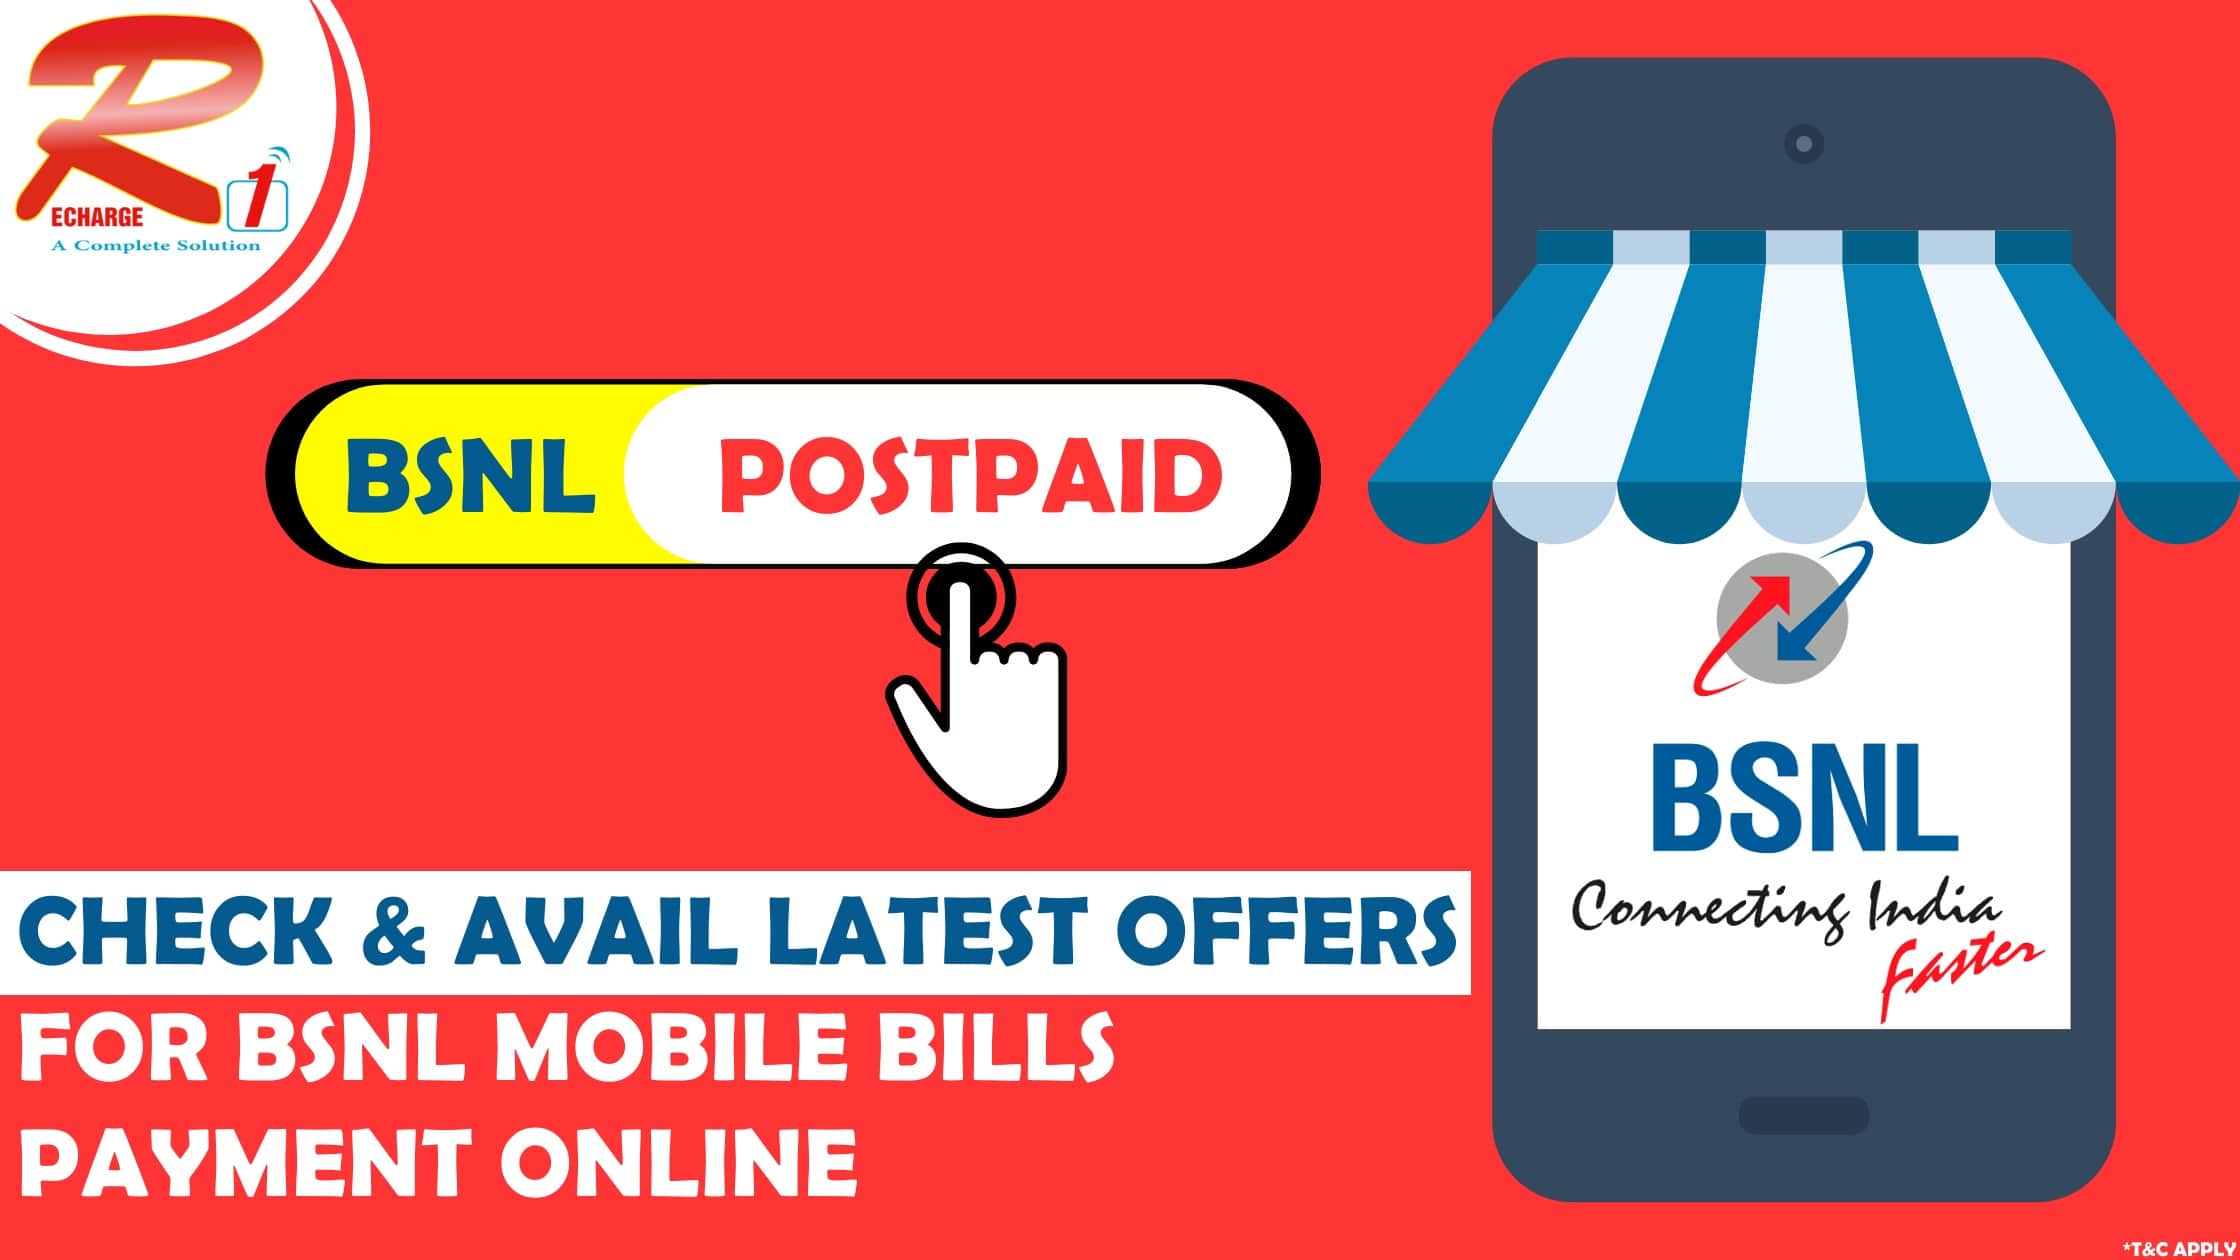  Check & Avail Latest Offers For BSNL Postpaid Bill Payment Online